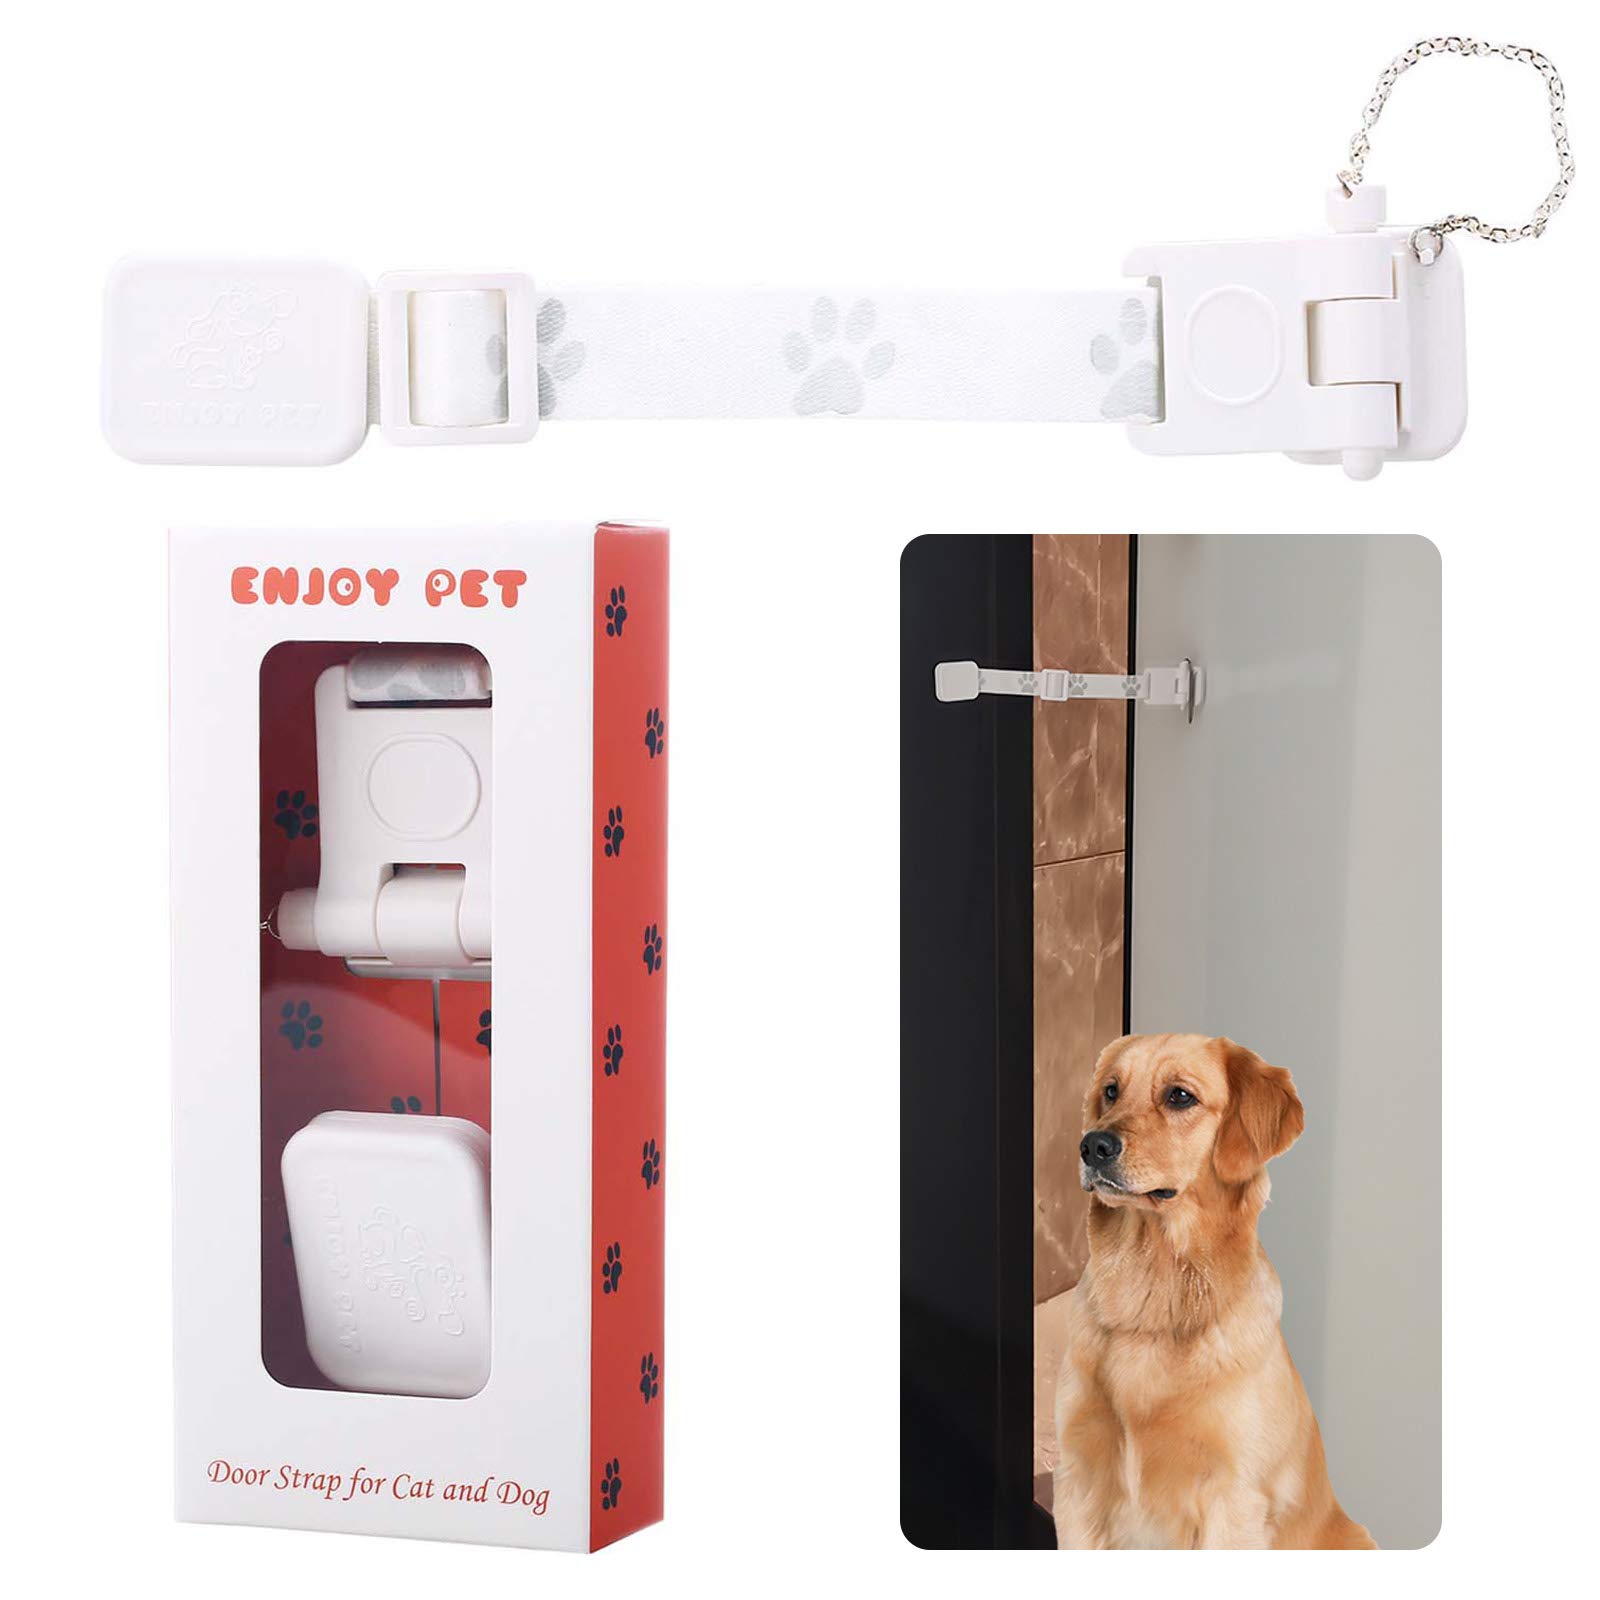 Keeps Dogs Out of Cat Feeder Adjustable Door Strap and Latch